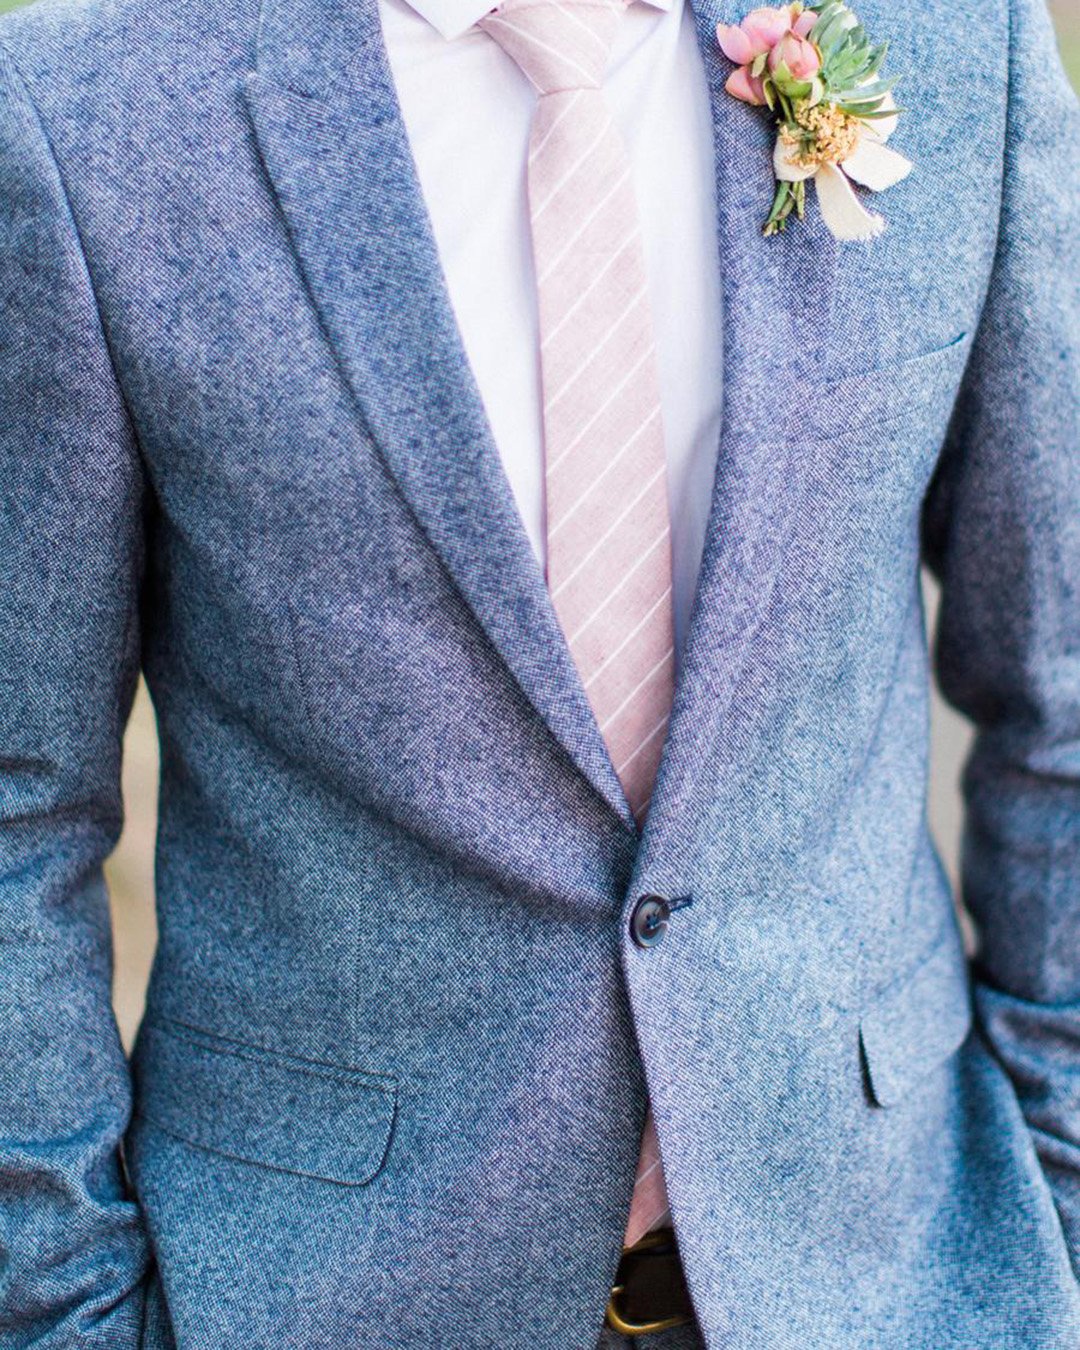 groom suits blue jacket with tie boutonniere agajonesphotography